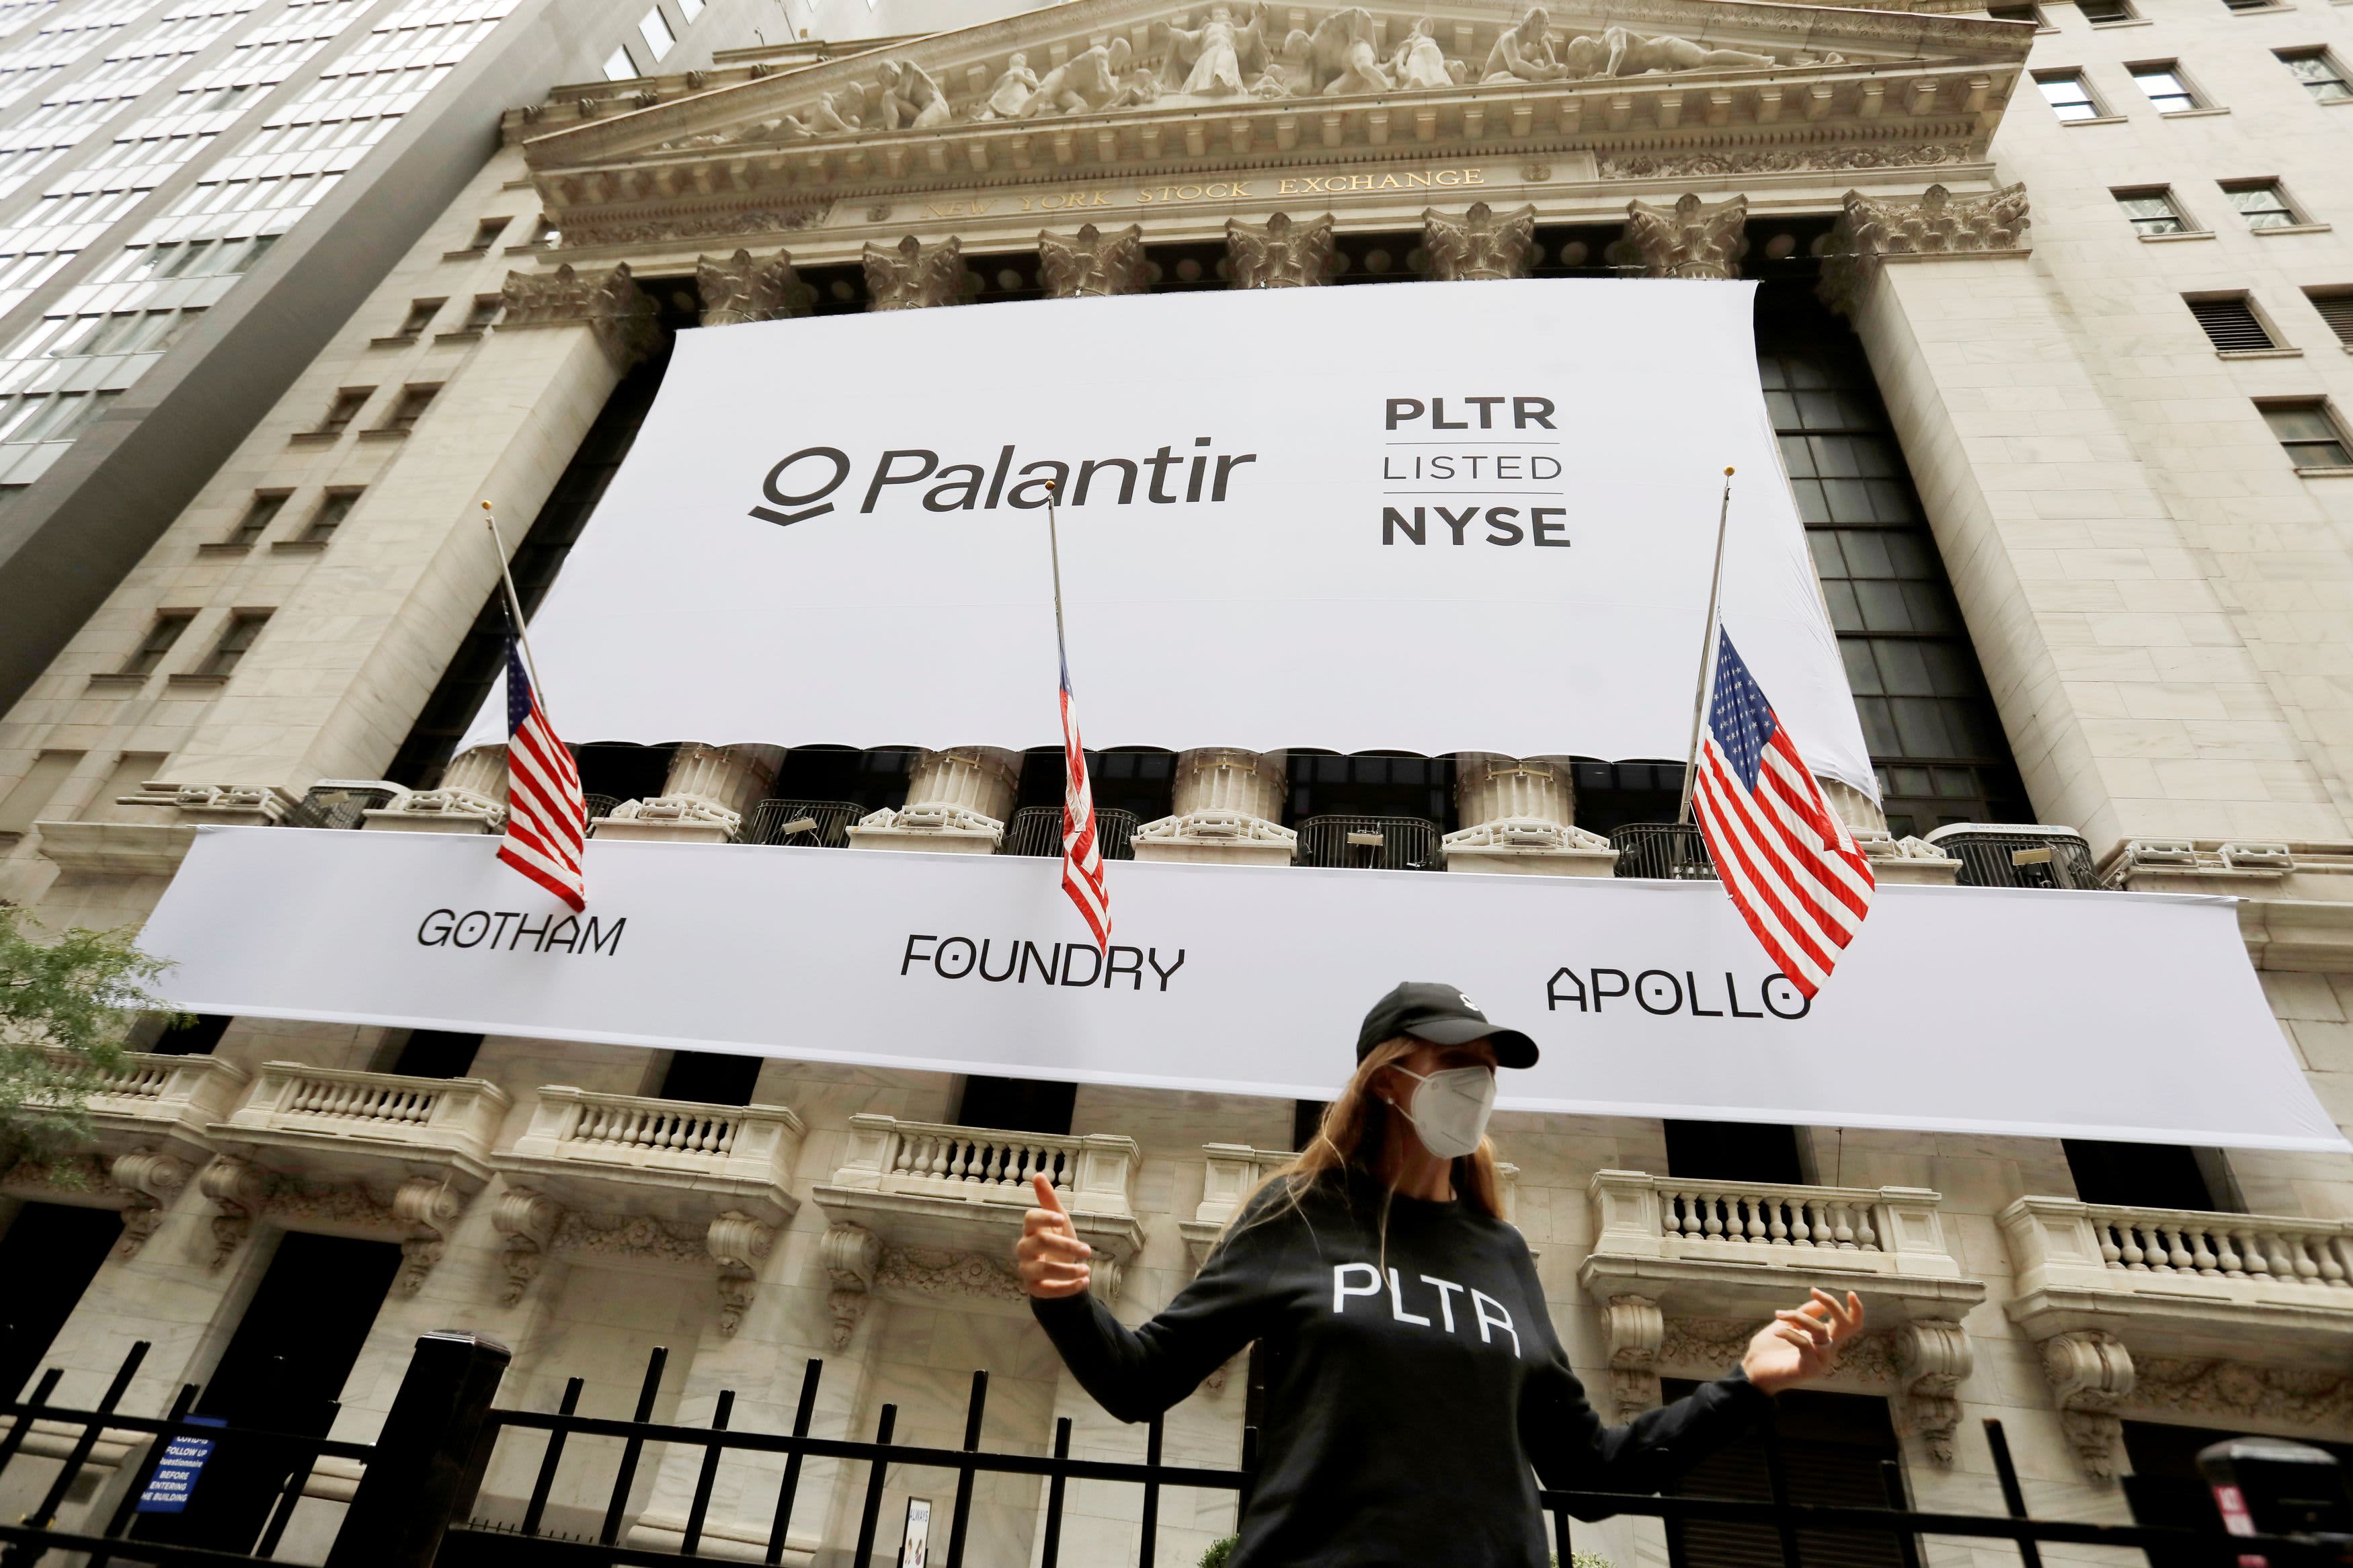 Palantir (PLTR) shows 52% growth in Q3 earnings report